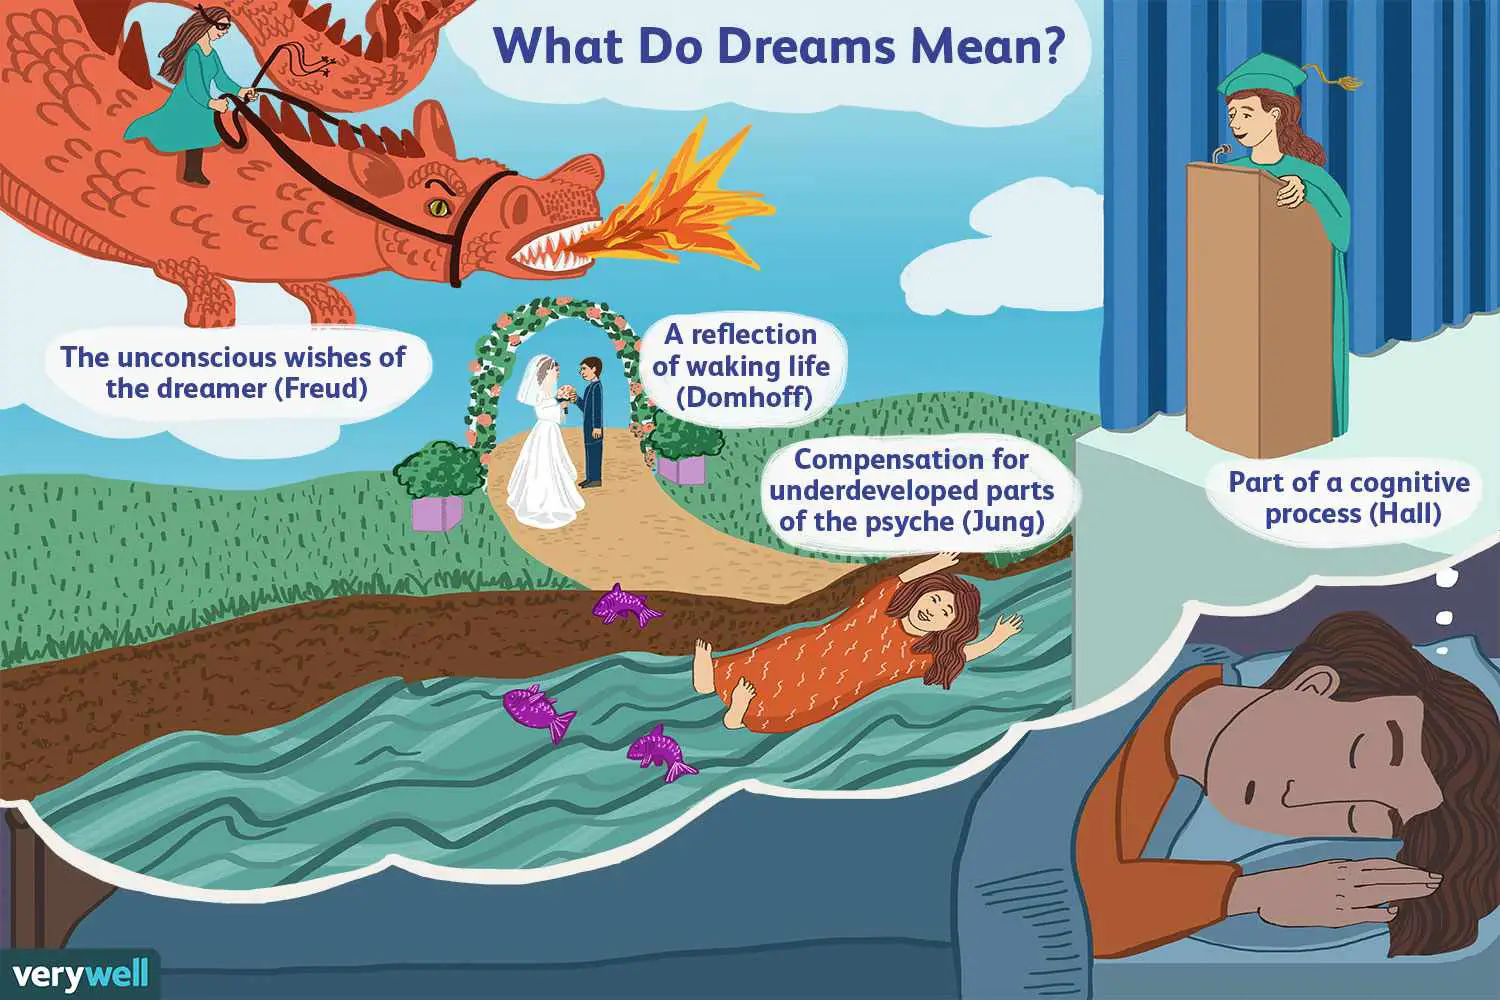 How To Use Dream Analysis To Interpret Dreams